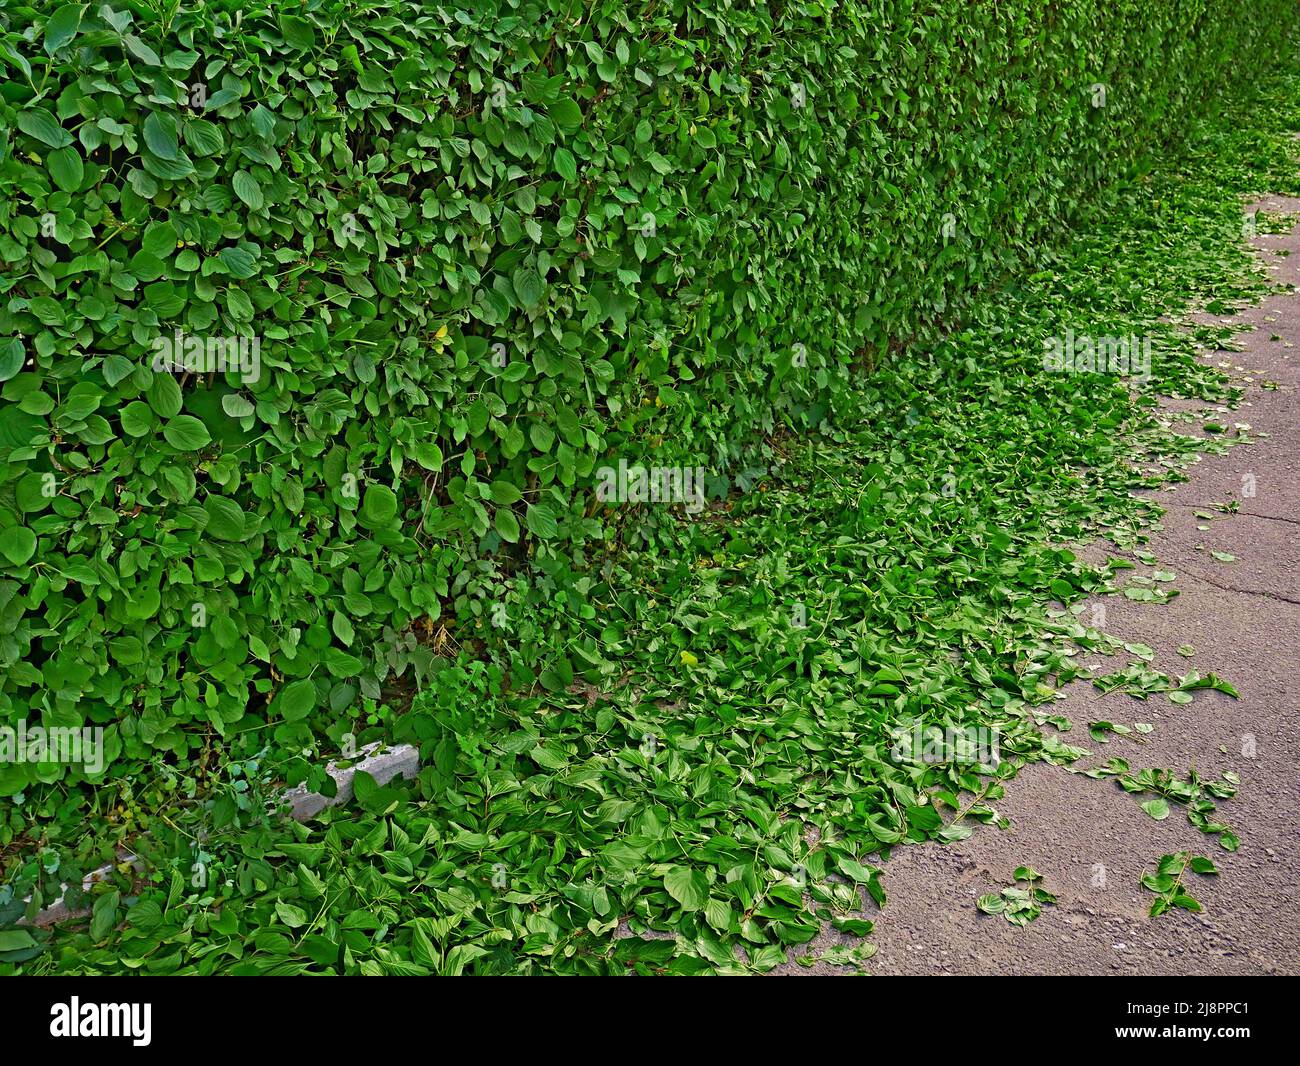 Live green fence from the bushes after spring pruning, part of the leaves lie on the asphalt pavement Stock Photo